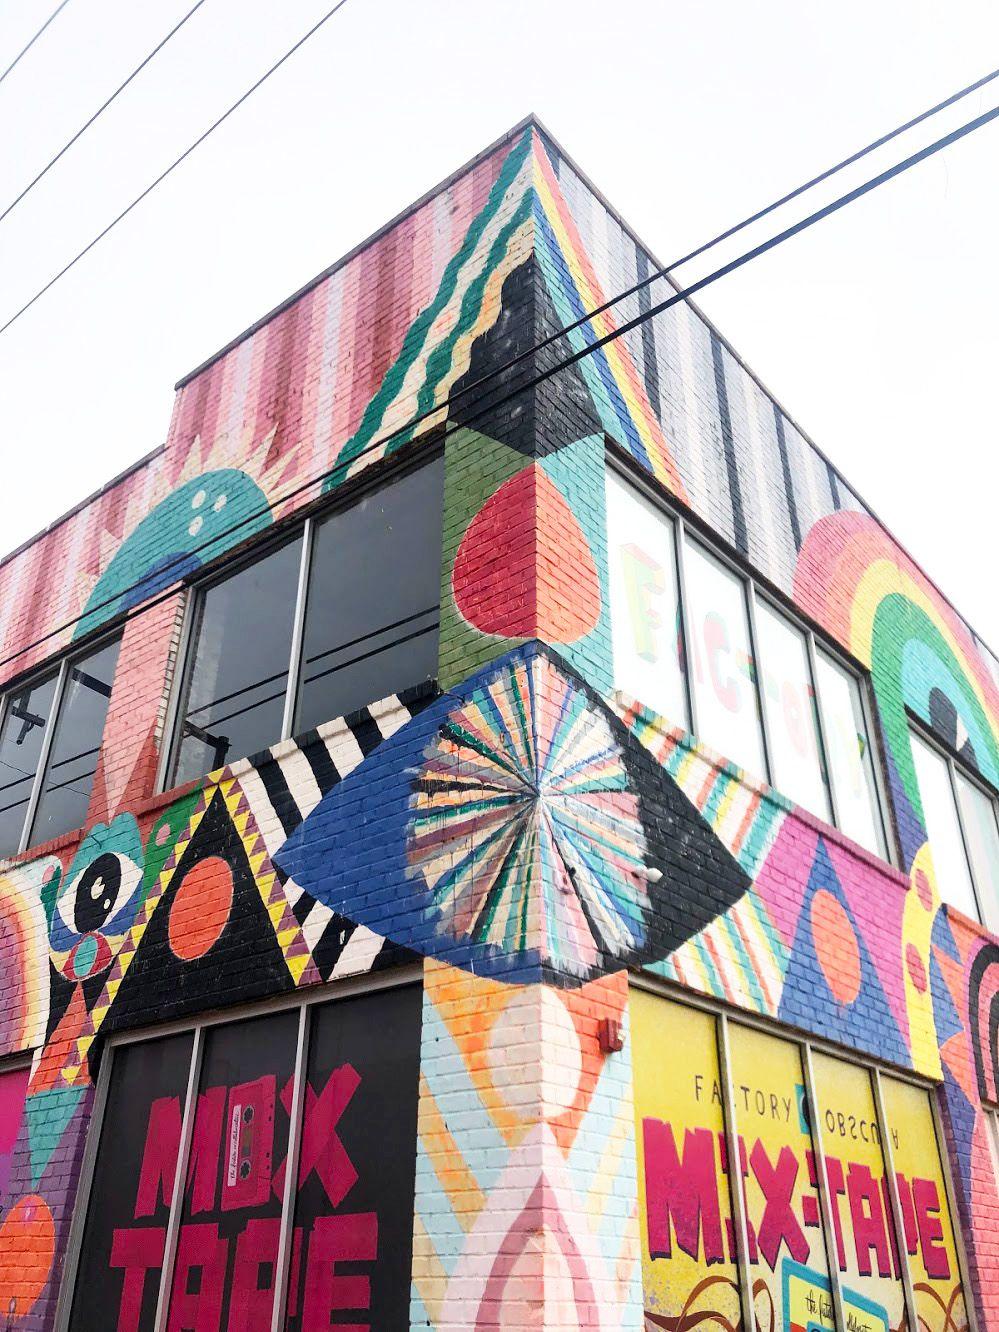 The colorful, painted exterior of Factory Obscura.